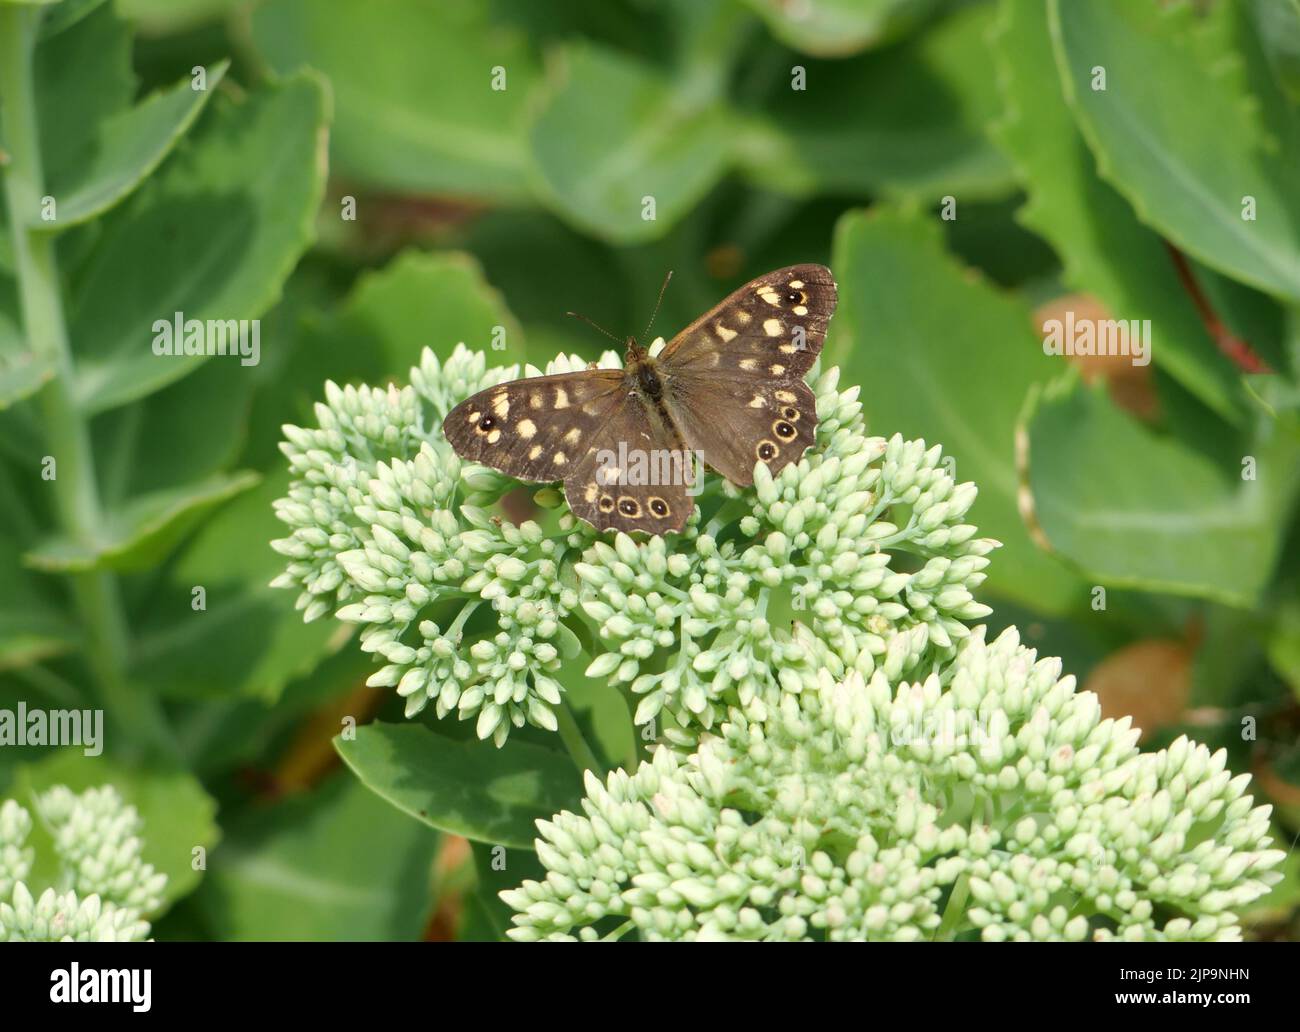 Speckled wood butterfly ( Pararge Aegeria ) on green sedum garden plant Stock Photo